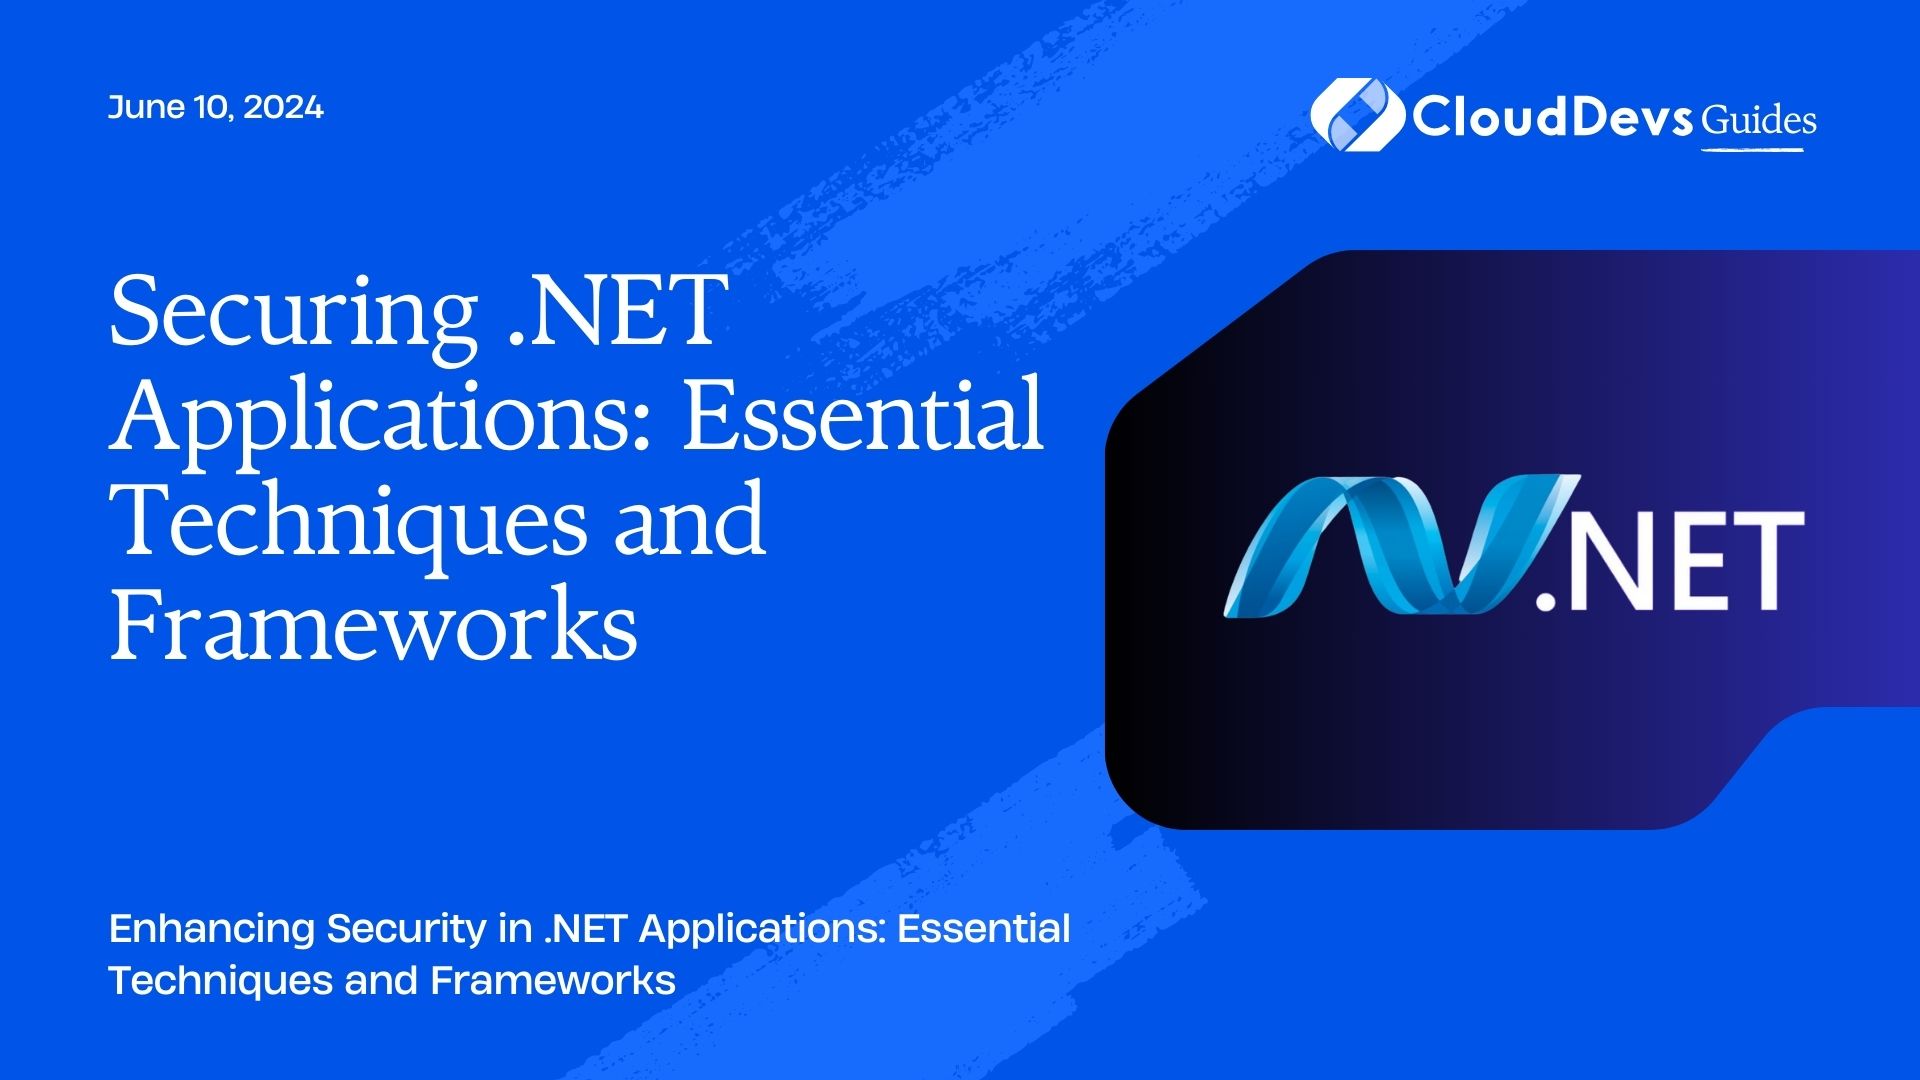 Securing .NET Applications: Essential Techniques and Frameworks